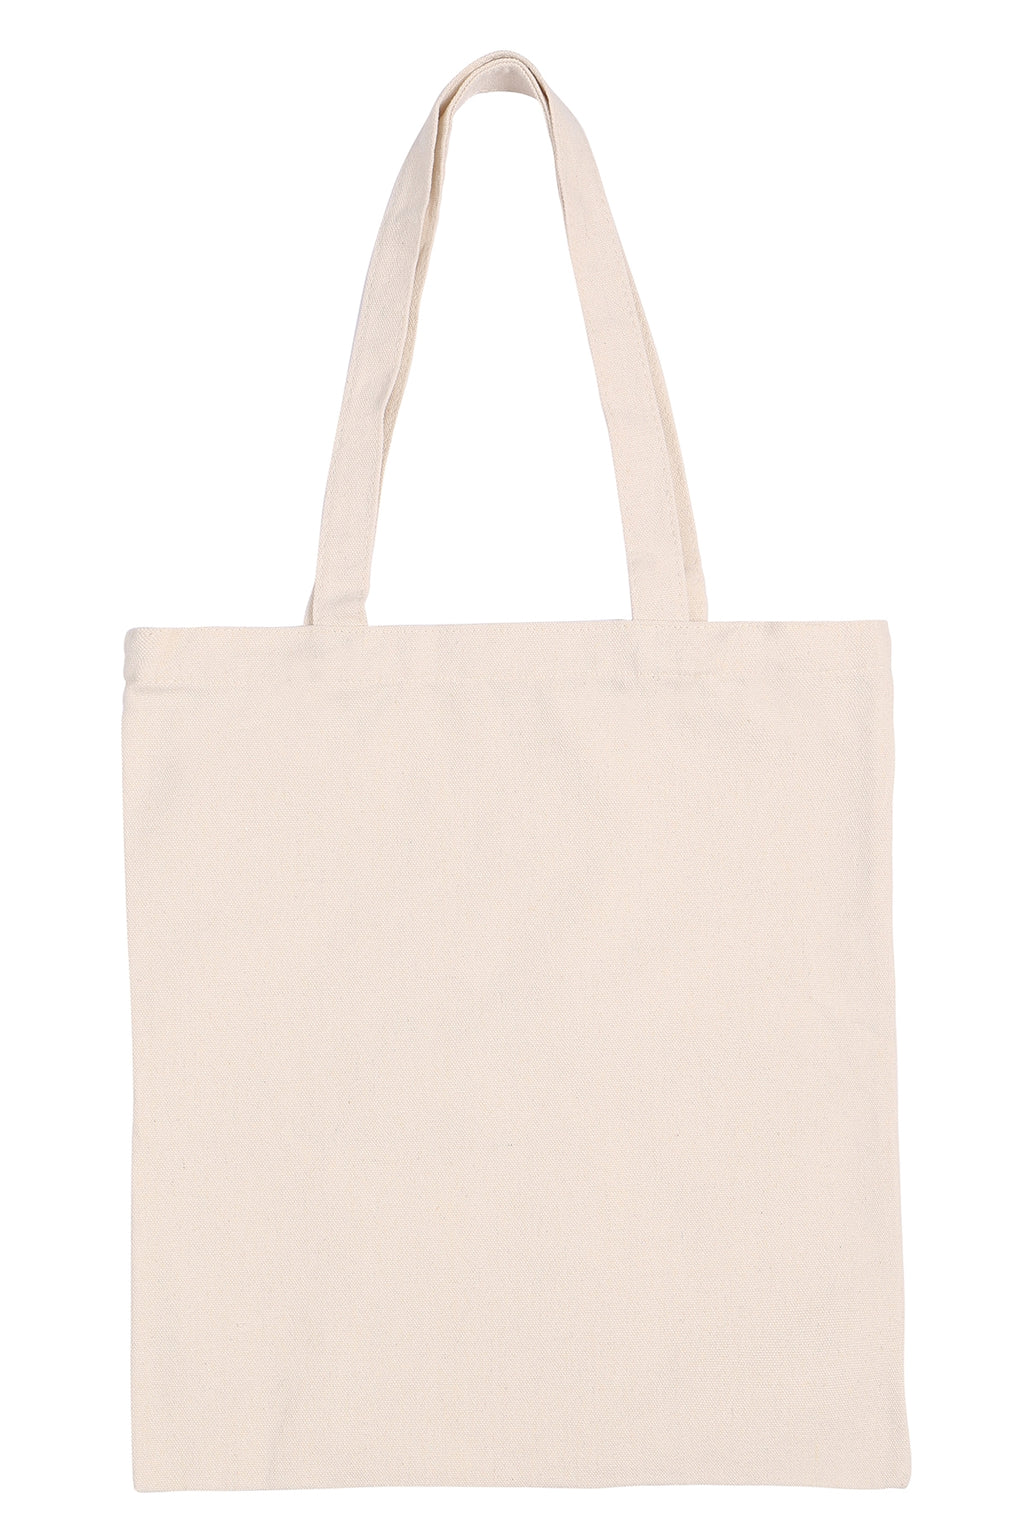 Plain Canvas Tote Bag - Pack of 6